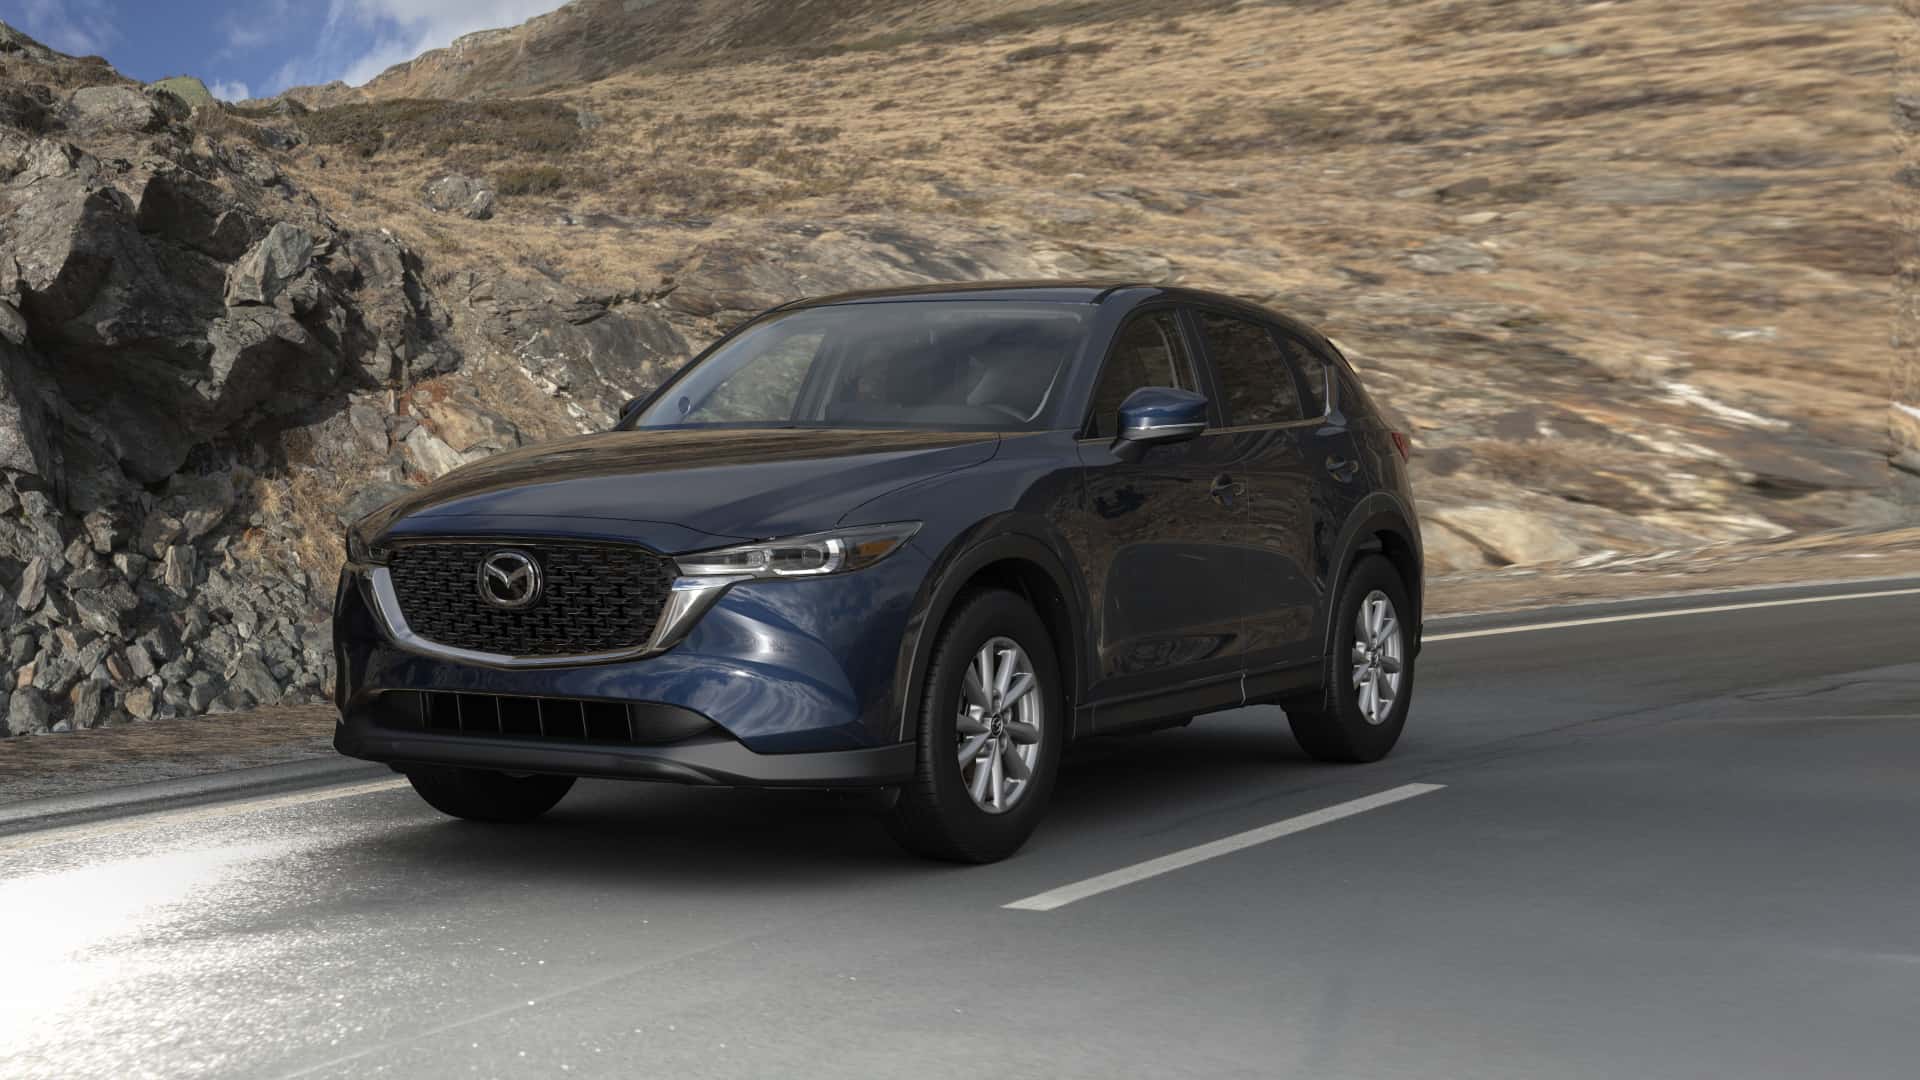 2023 Mazda CX-5 2.5 S Preferred Deep Crystal Blue Mica | Russell & Smith Mazda in Houston TX